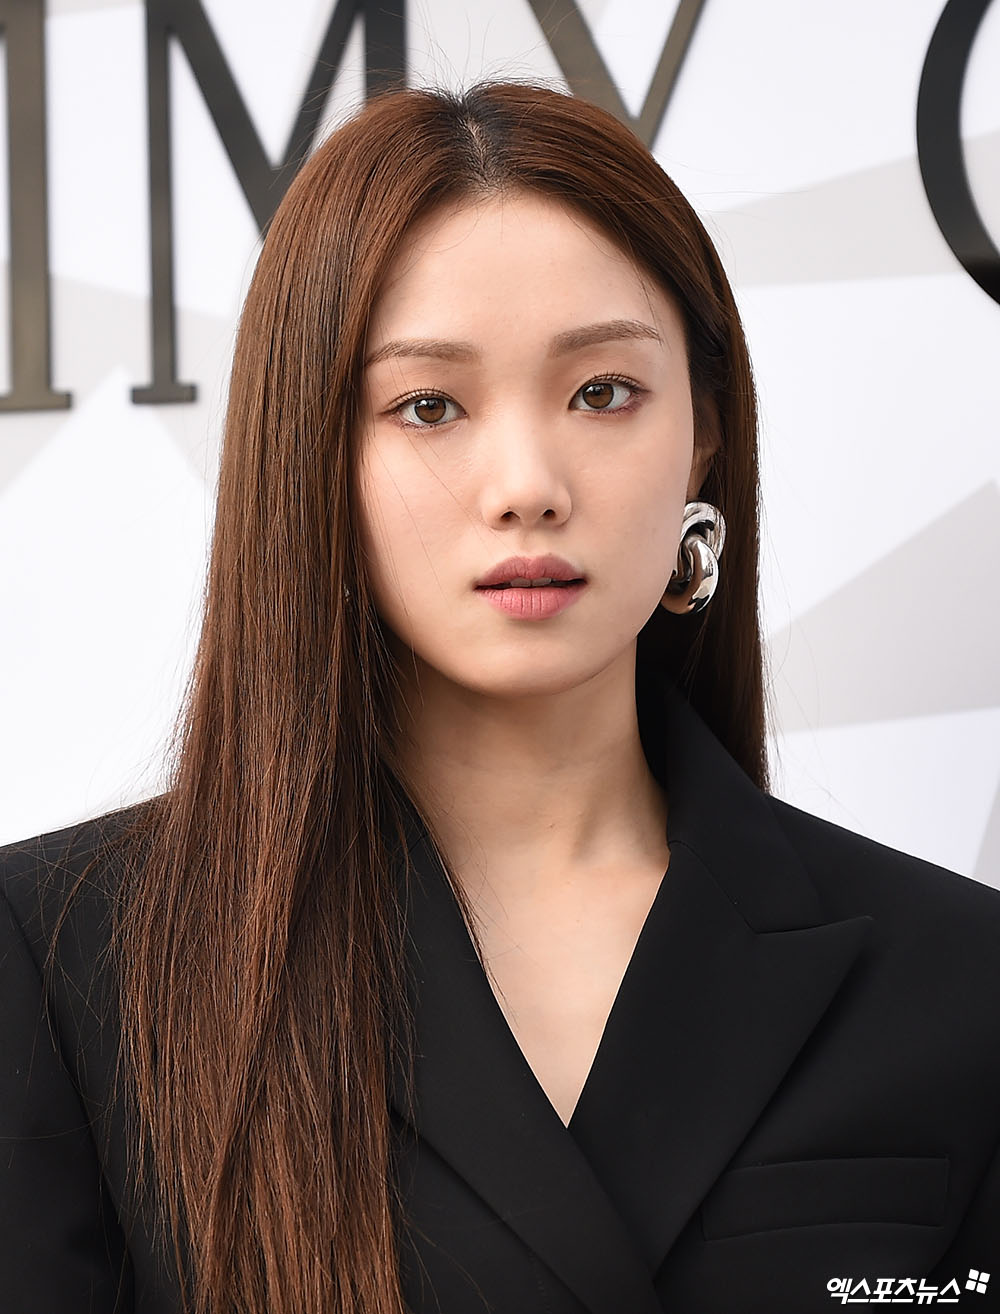 Actor Lee Sung-kyung, who attended the Jimmy Chu event held at the Gallery Department Store in Apgujeong-dong, Seoul on the afternoon of the 18th, has photo time.